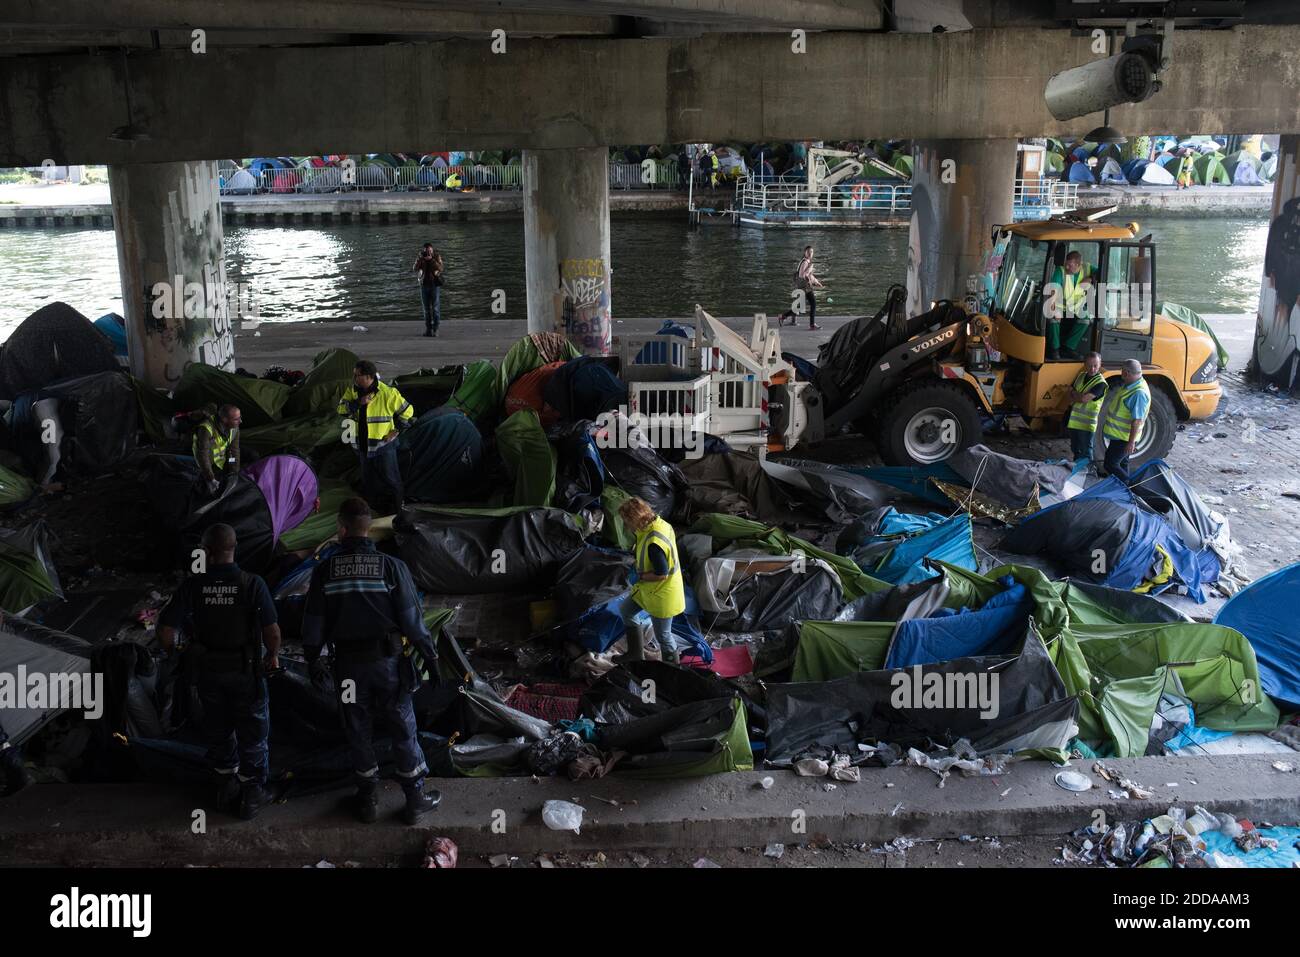 Workers clean up the Millenaire migrants makeshift camp along the Canal de Saint-Denis near Porte de la Villette, northern Paris, France, following its evacuation on May 30, 2018. More than a thousand migrants and refugees were evacuated on early May 30, 2018 from a makeshift camp that had been set up for several weeks along the Canal. Photo by Samuel Boivin/ABACAPRESS.COM Stock Photo